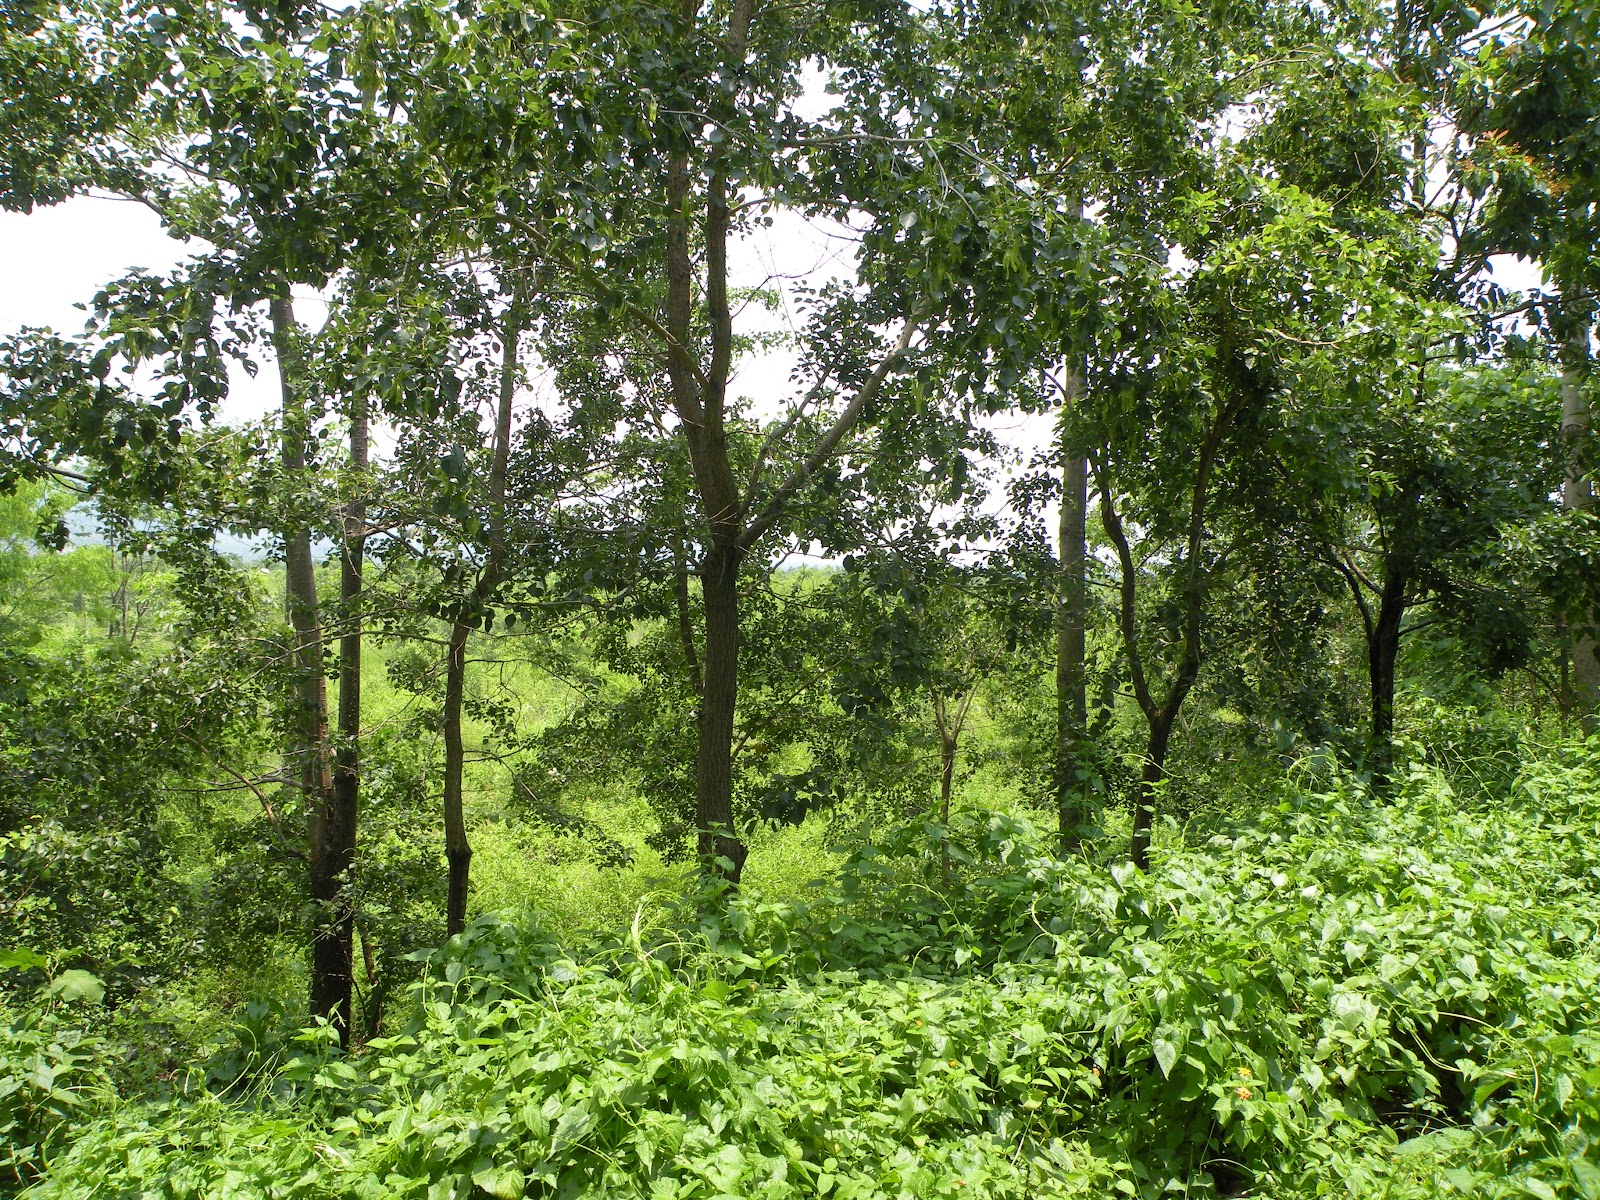 Download this The Total Area Bhairabkunda Reserve Forest Even picture